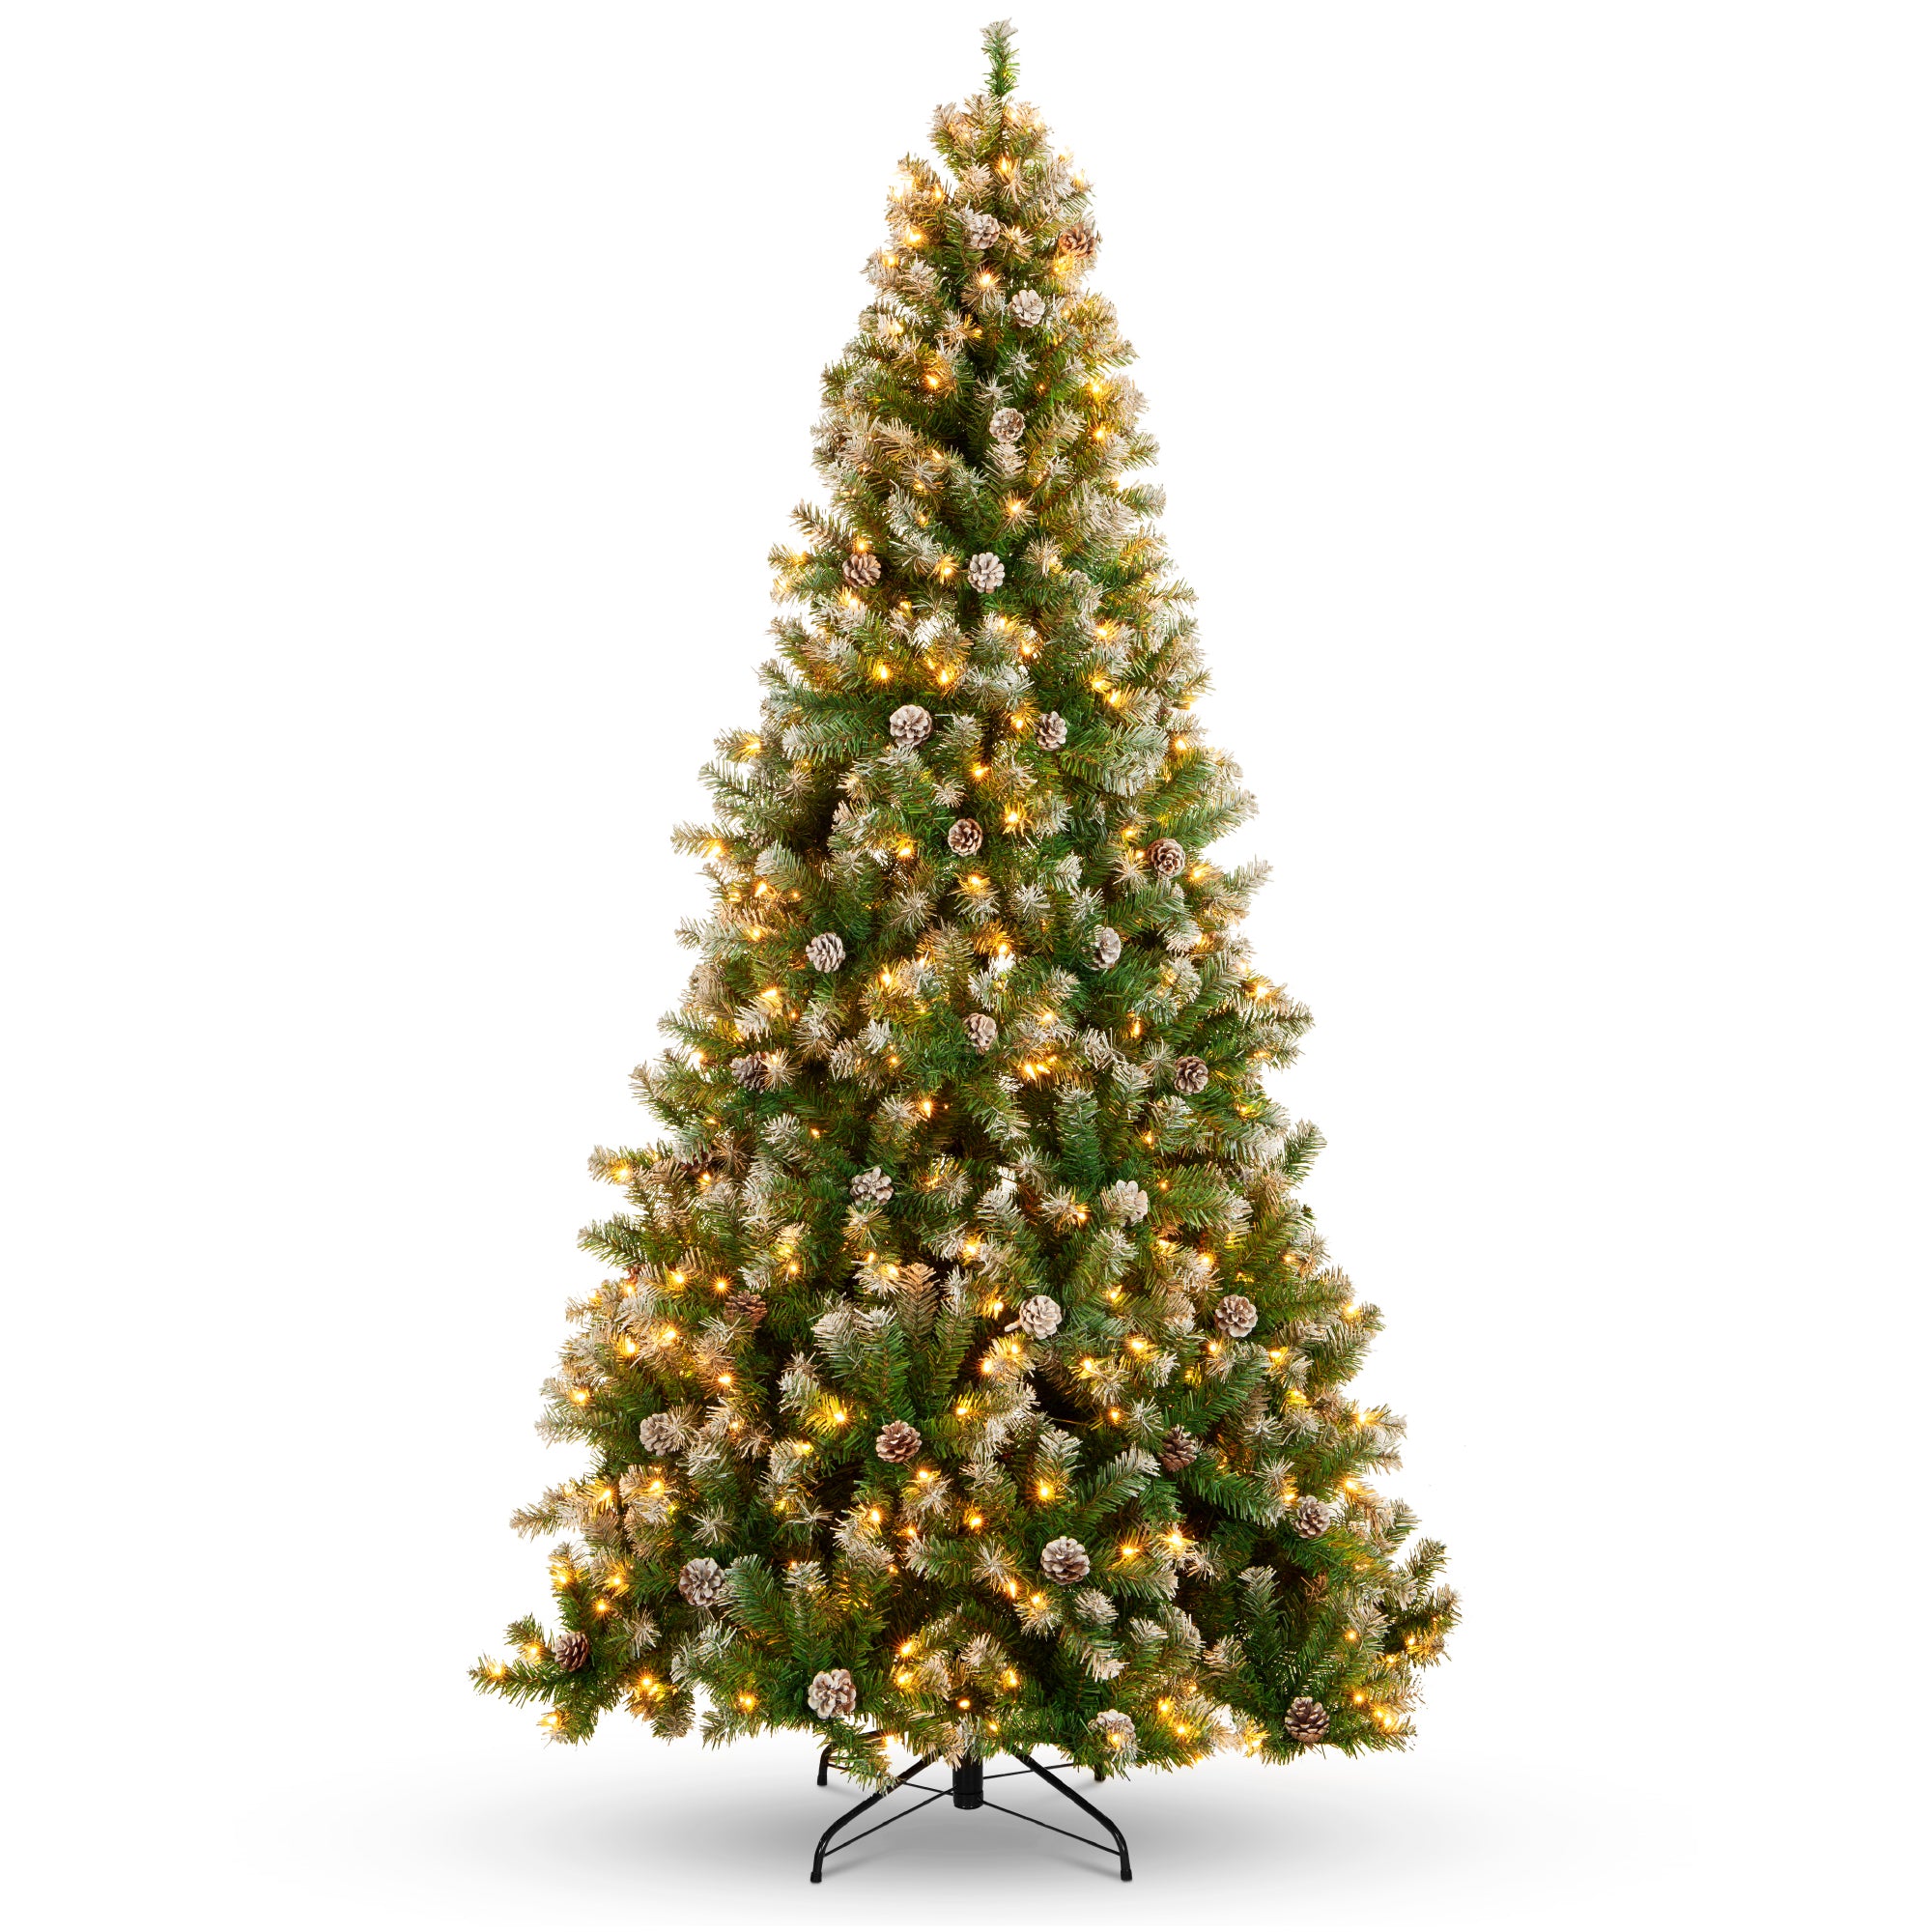 How to Fill in Ugly Bare Spots on Your Christmas Tree « Christmas